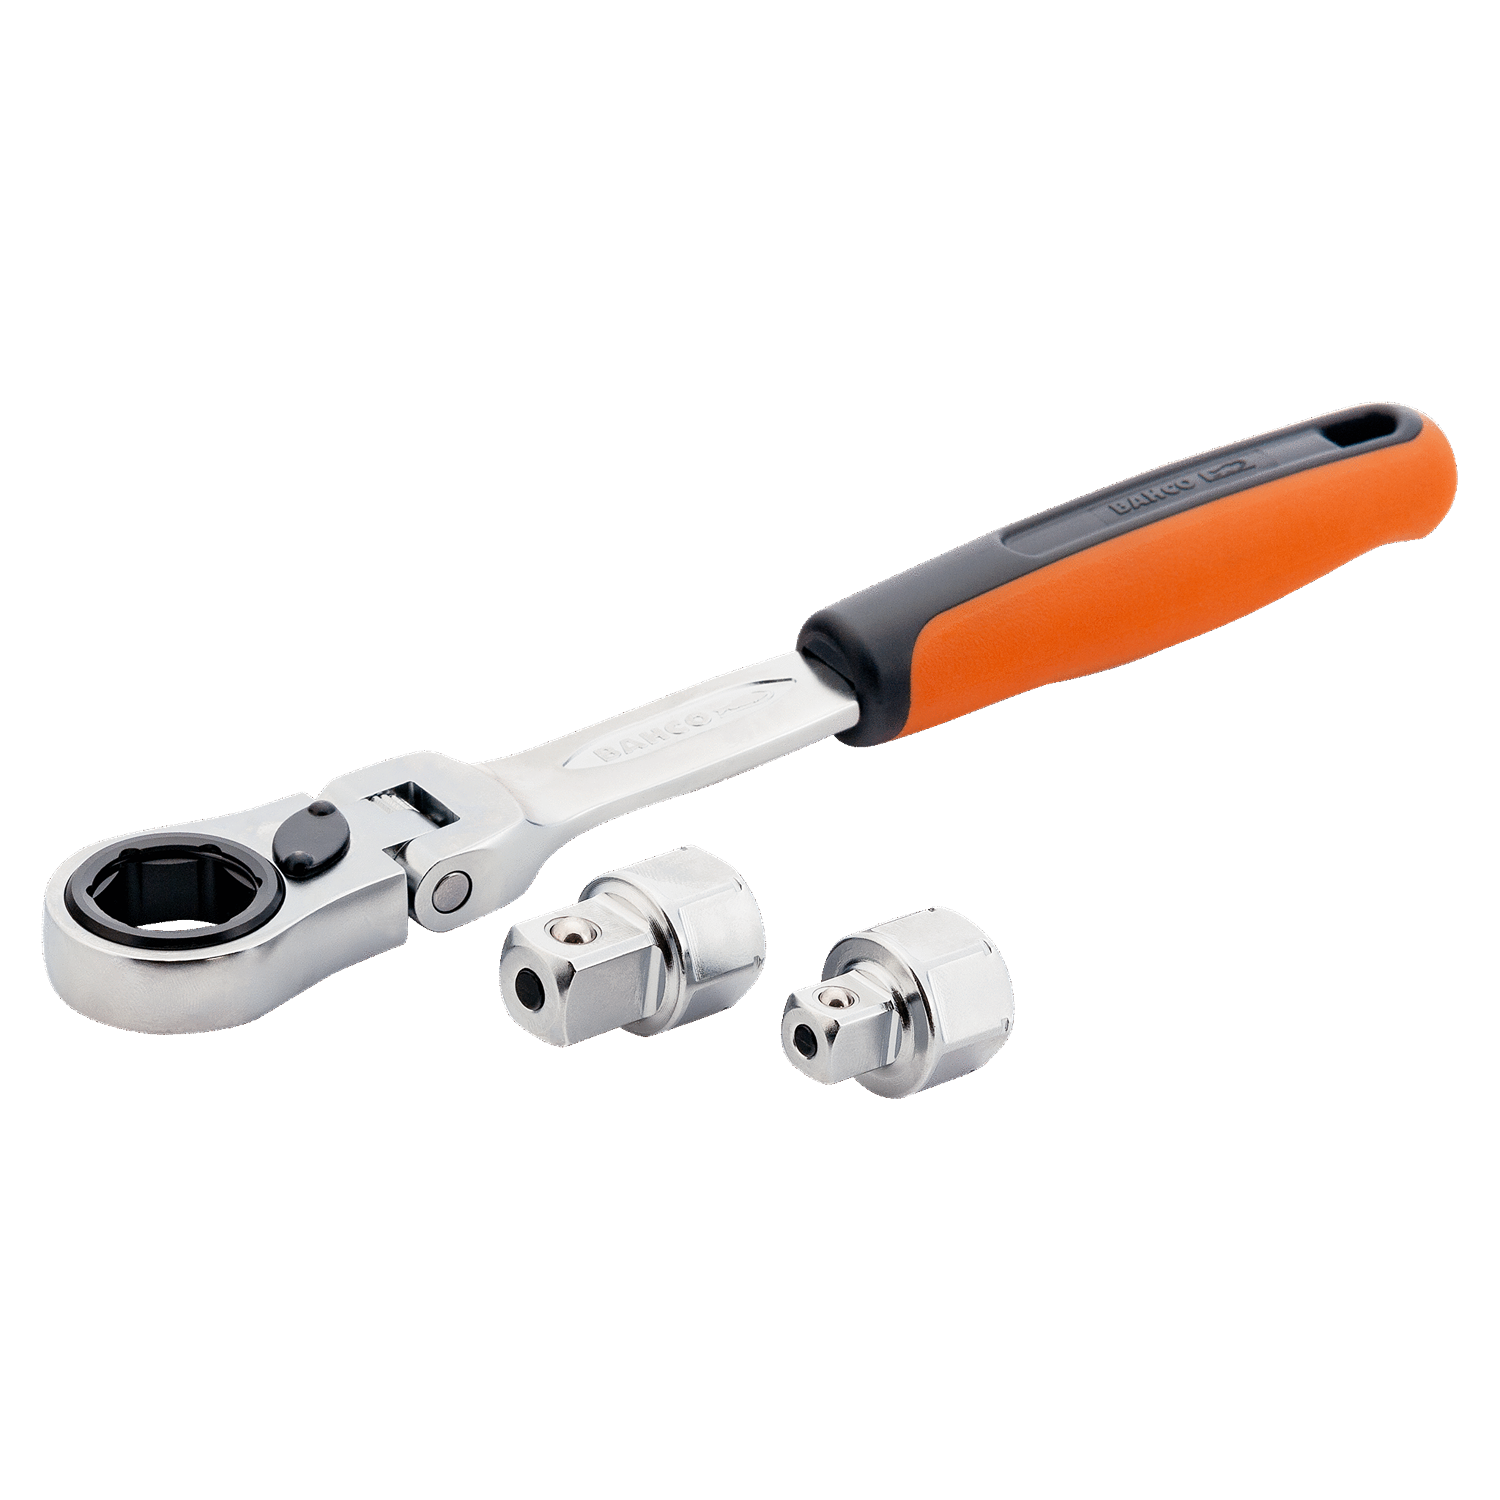 BAHCO S140T-R Pass- Through Ratchet Set Hex To Drive Adaptors - Premium Pass- Through Ratchet from BAHCO - Shop now at Yew Aik.